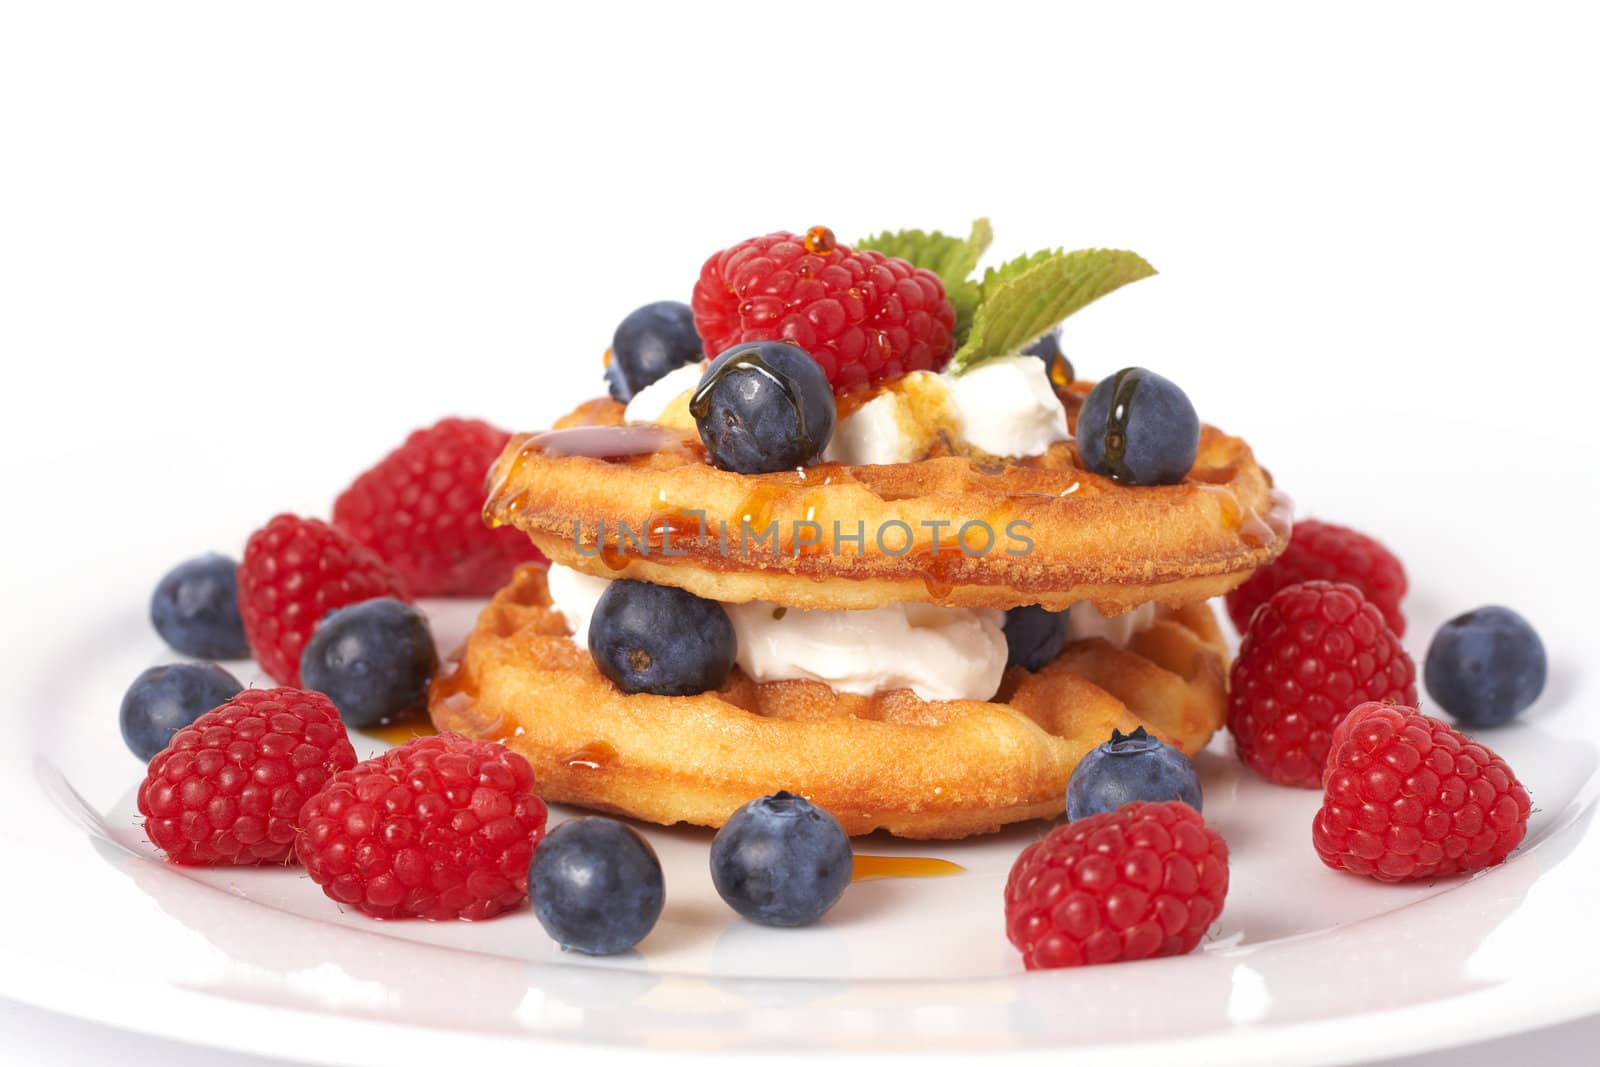 Belgian waffles with fresh raspberries, blueberries, mint leaves and cream on white plate